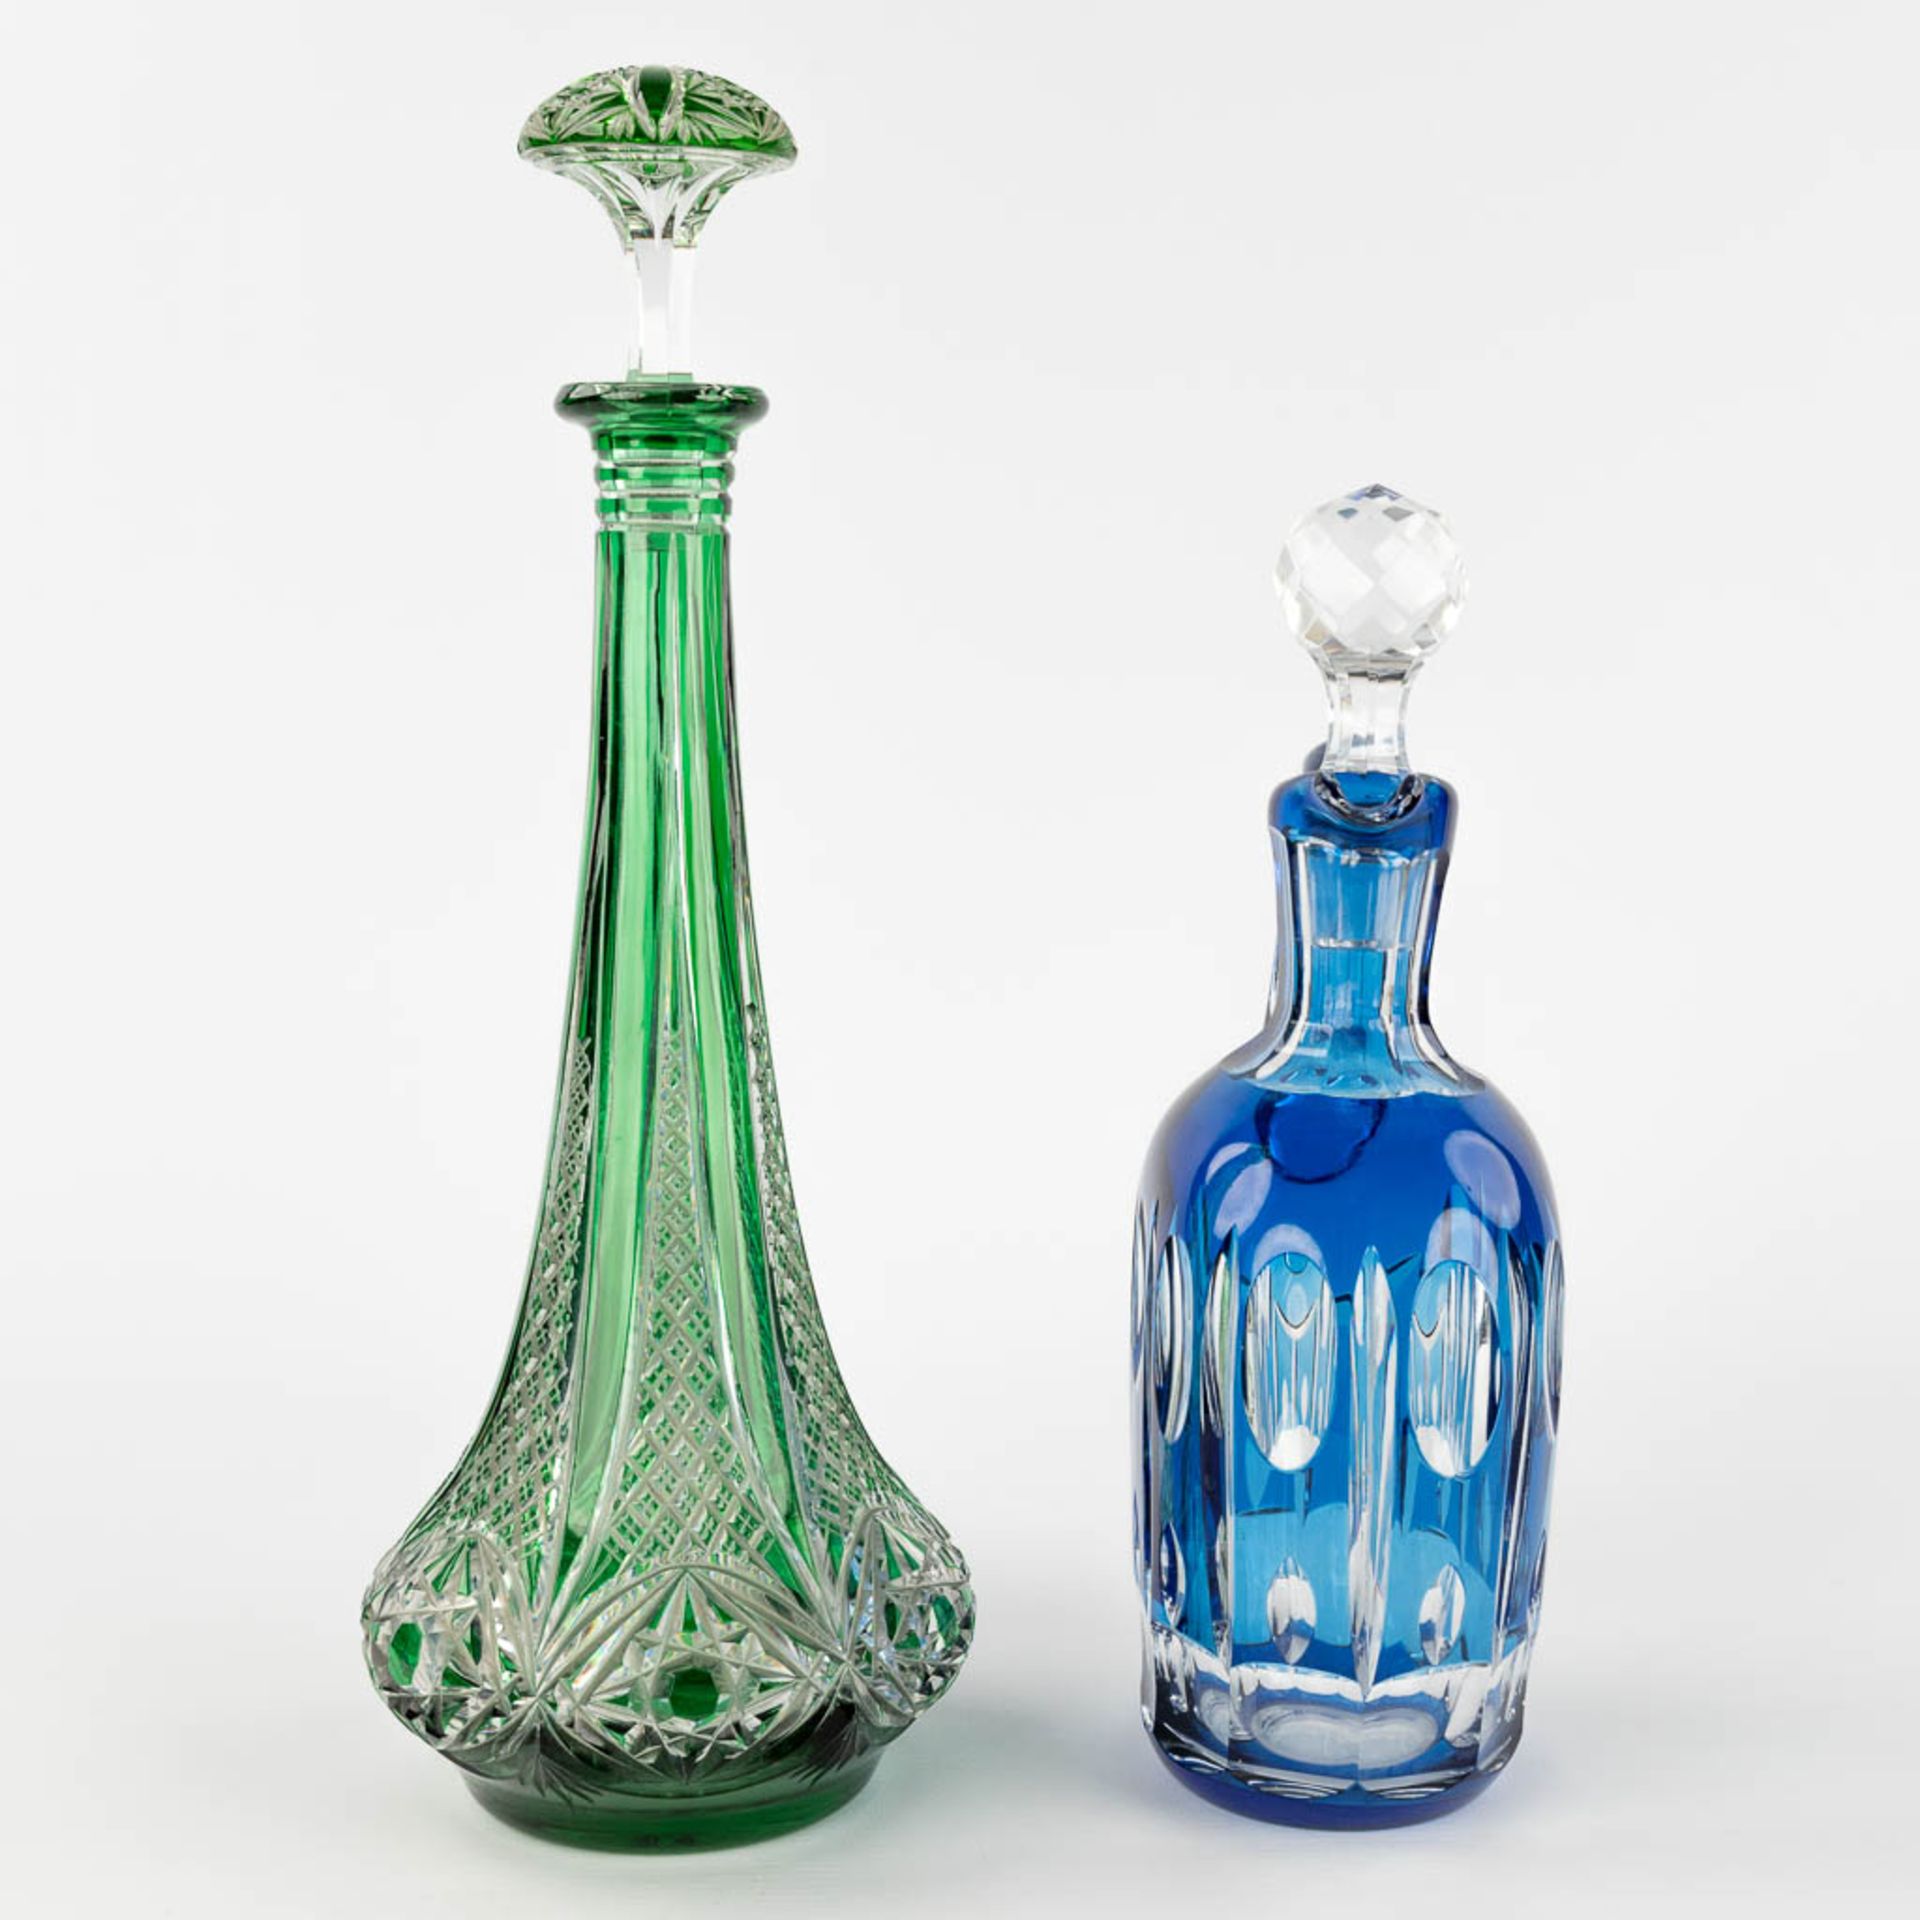 A collection of 5 vases and carafes, Bohemian glass and Val Saint Lambert. (H: 37 x D: 14 cm) - Image 7 of 18